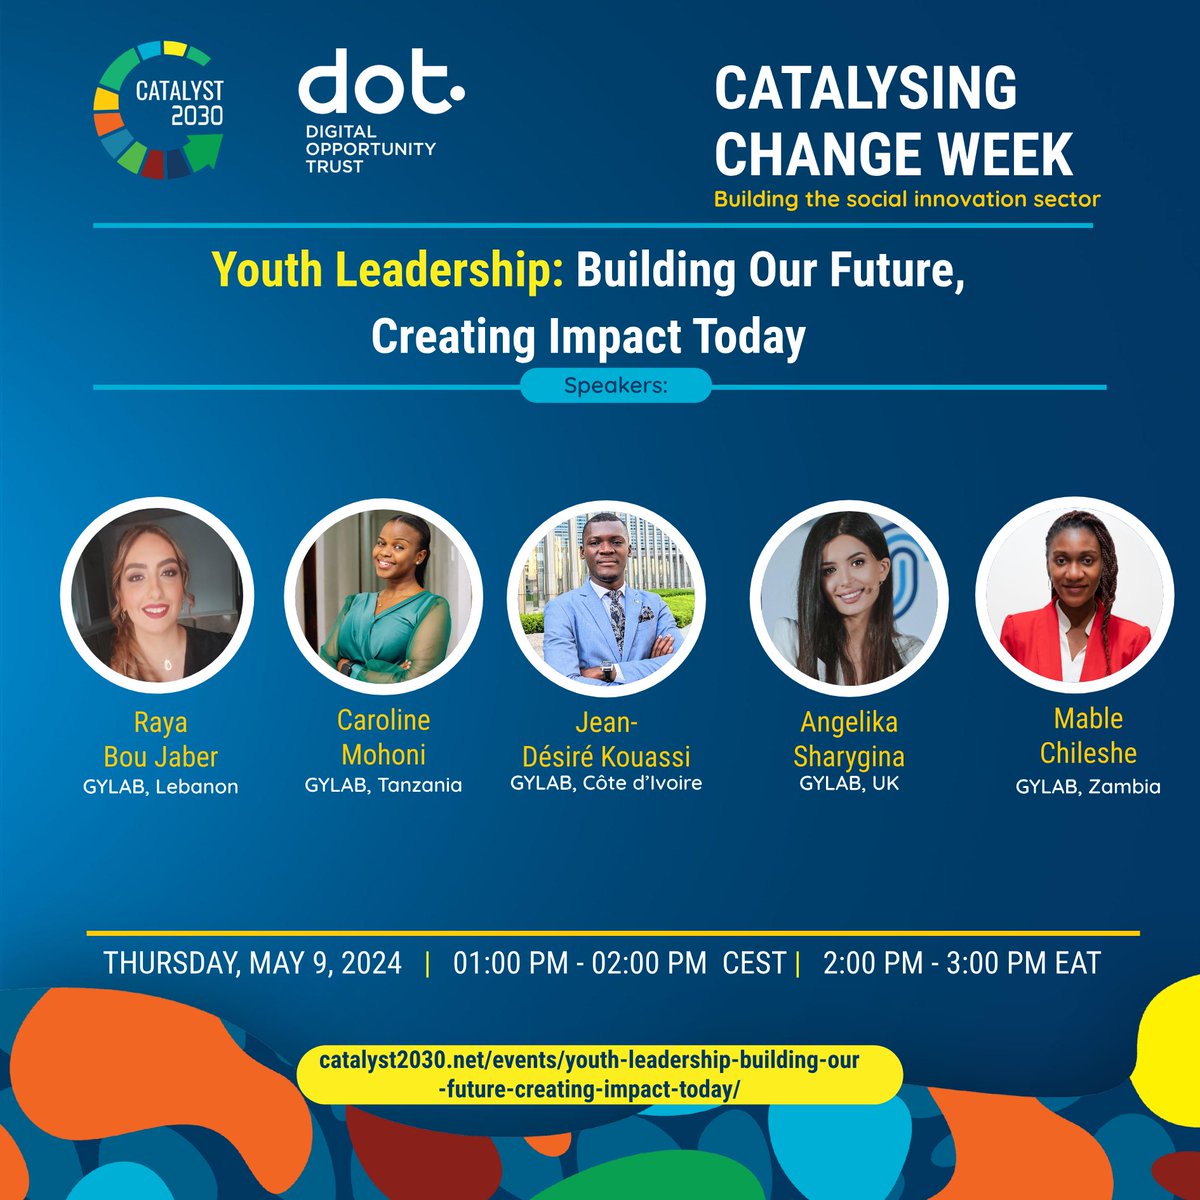 Ready to reimagine leadership with collaboration, empathy & inclusion? Join DOT's Global Youth Leadership Advisory Board launch and panel discussion at the #CatalysingChangeWeek2024 Register today: catalyst2030.net/events/youth-l… #DOTYouth #CCW2024 #Catalyst2030 #YouthLead